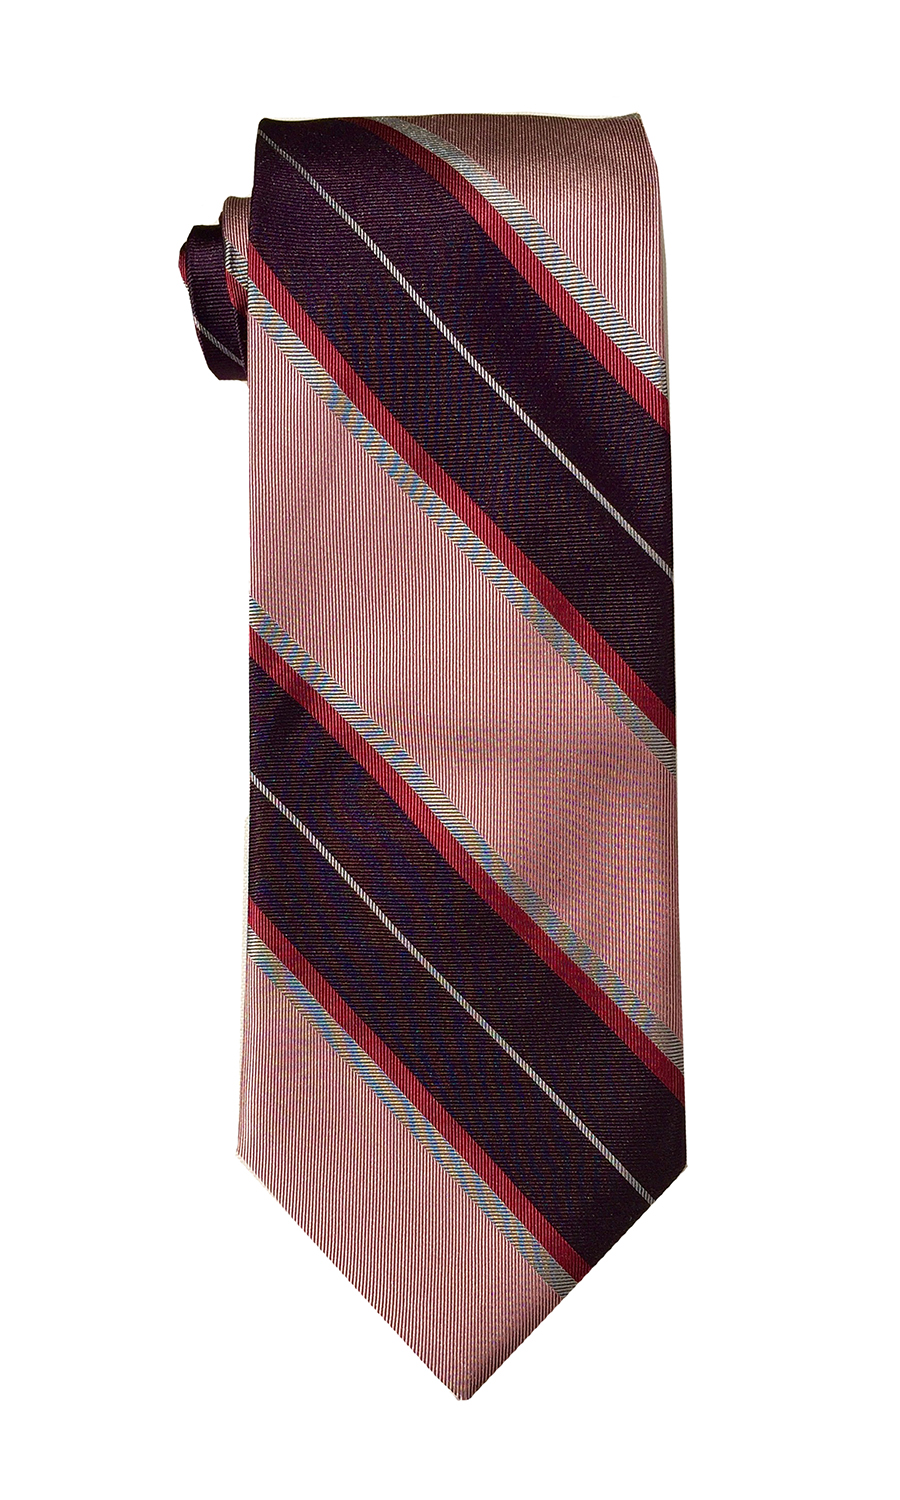 Oscar Lima tie in dusty pink and imperial purple